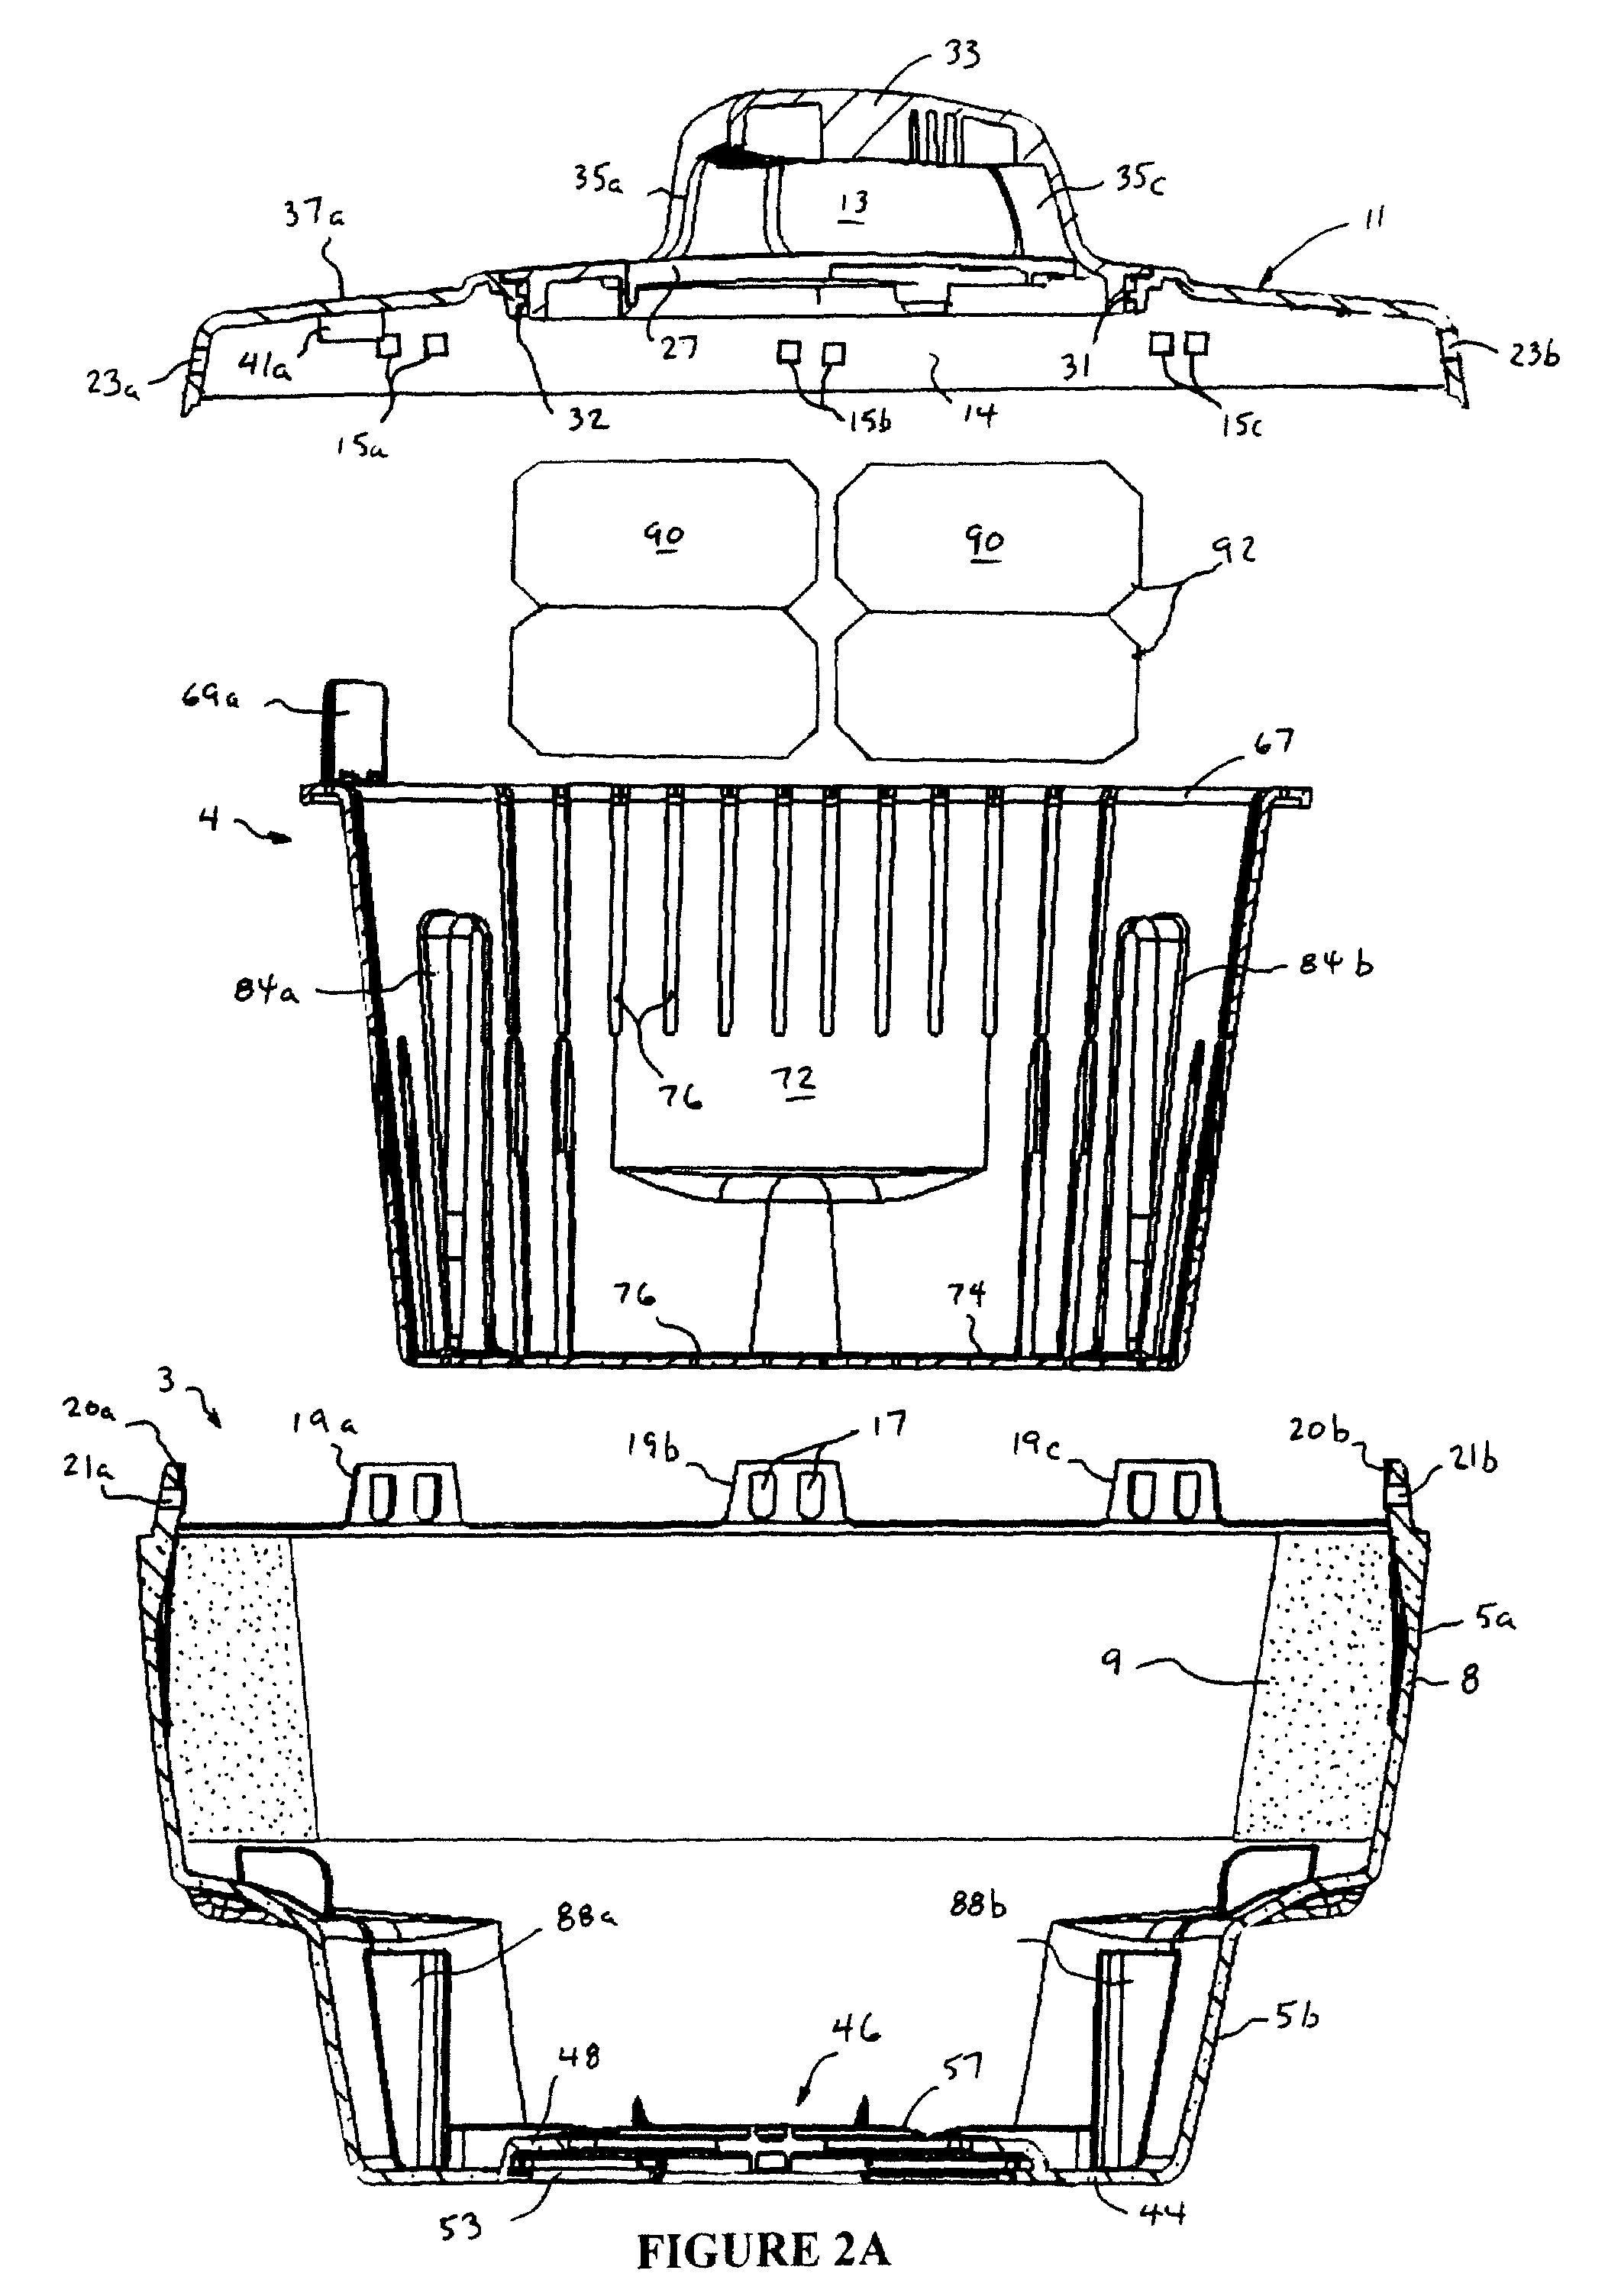 Floating dispenser for dispensing a solid dissolvable chemical into ambient water